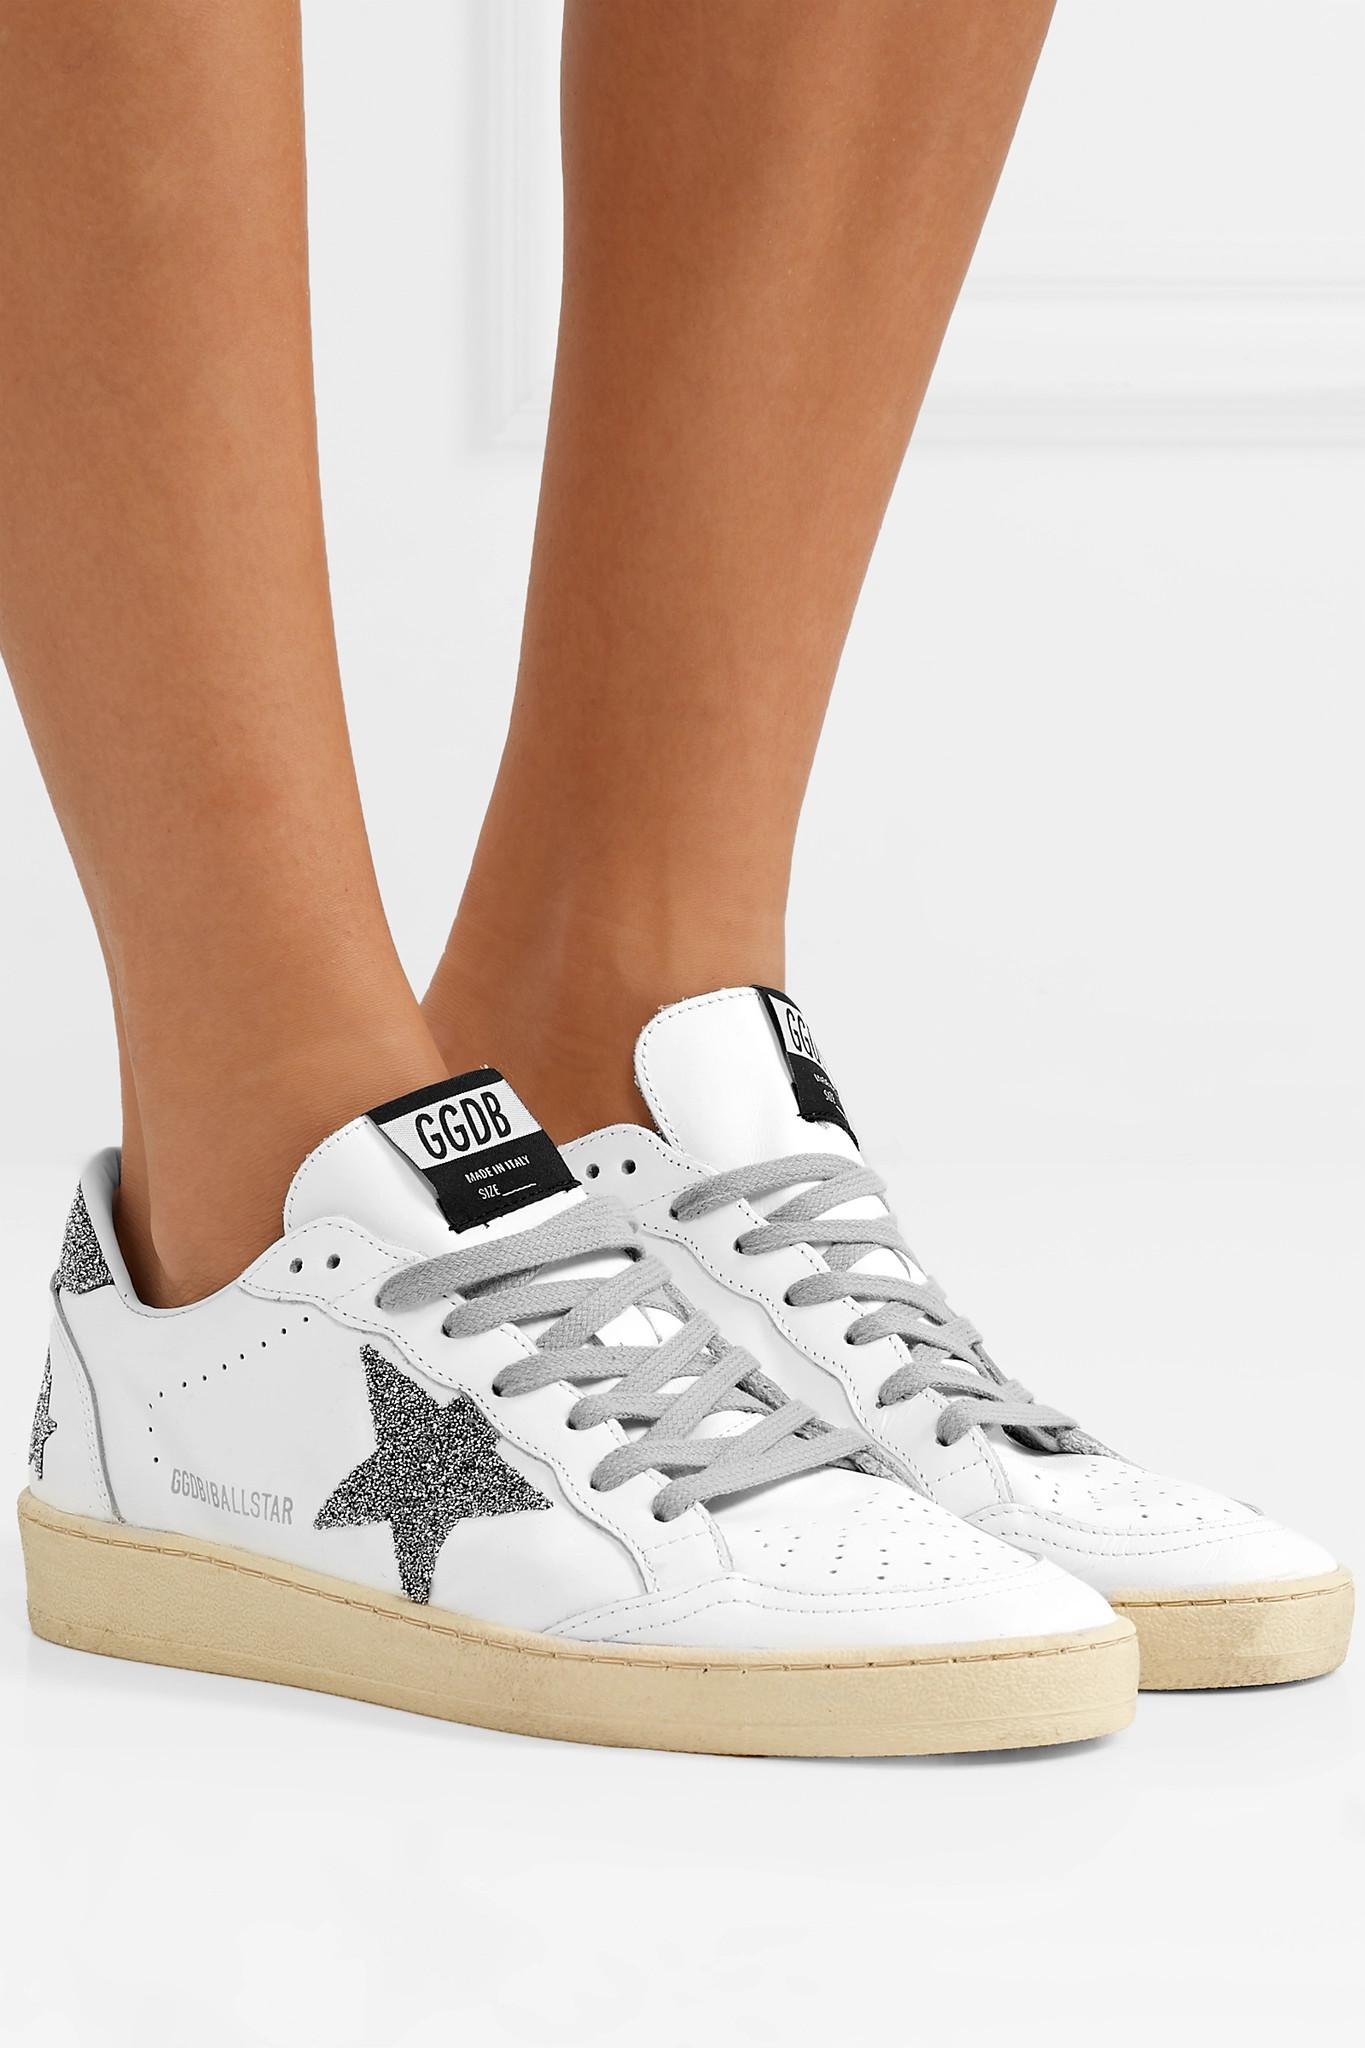 Golden Goose Ball Star Swarovski Crystal-embellished Leather Sneakers in  White | Lyst